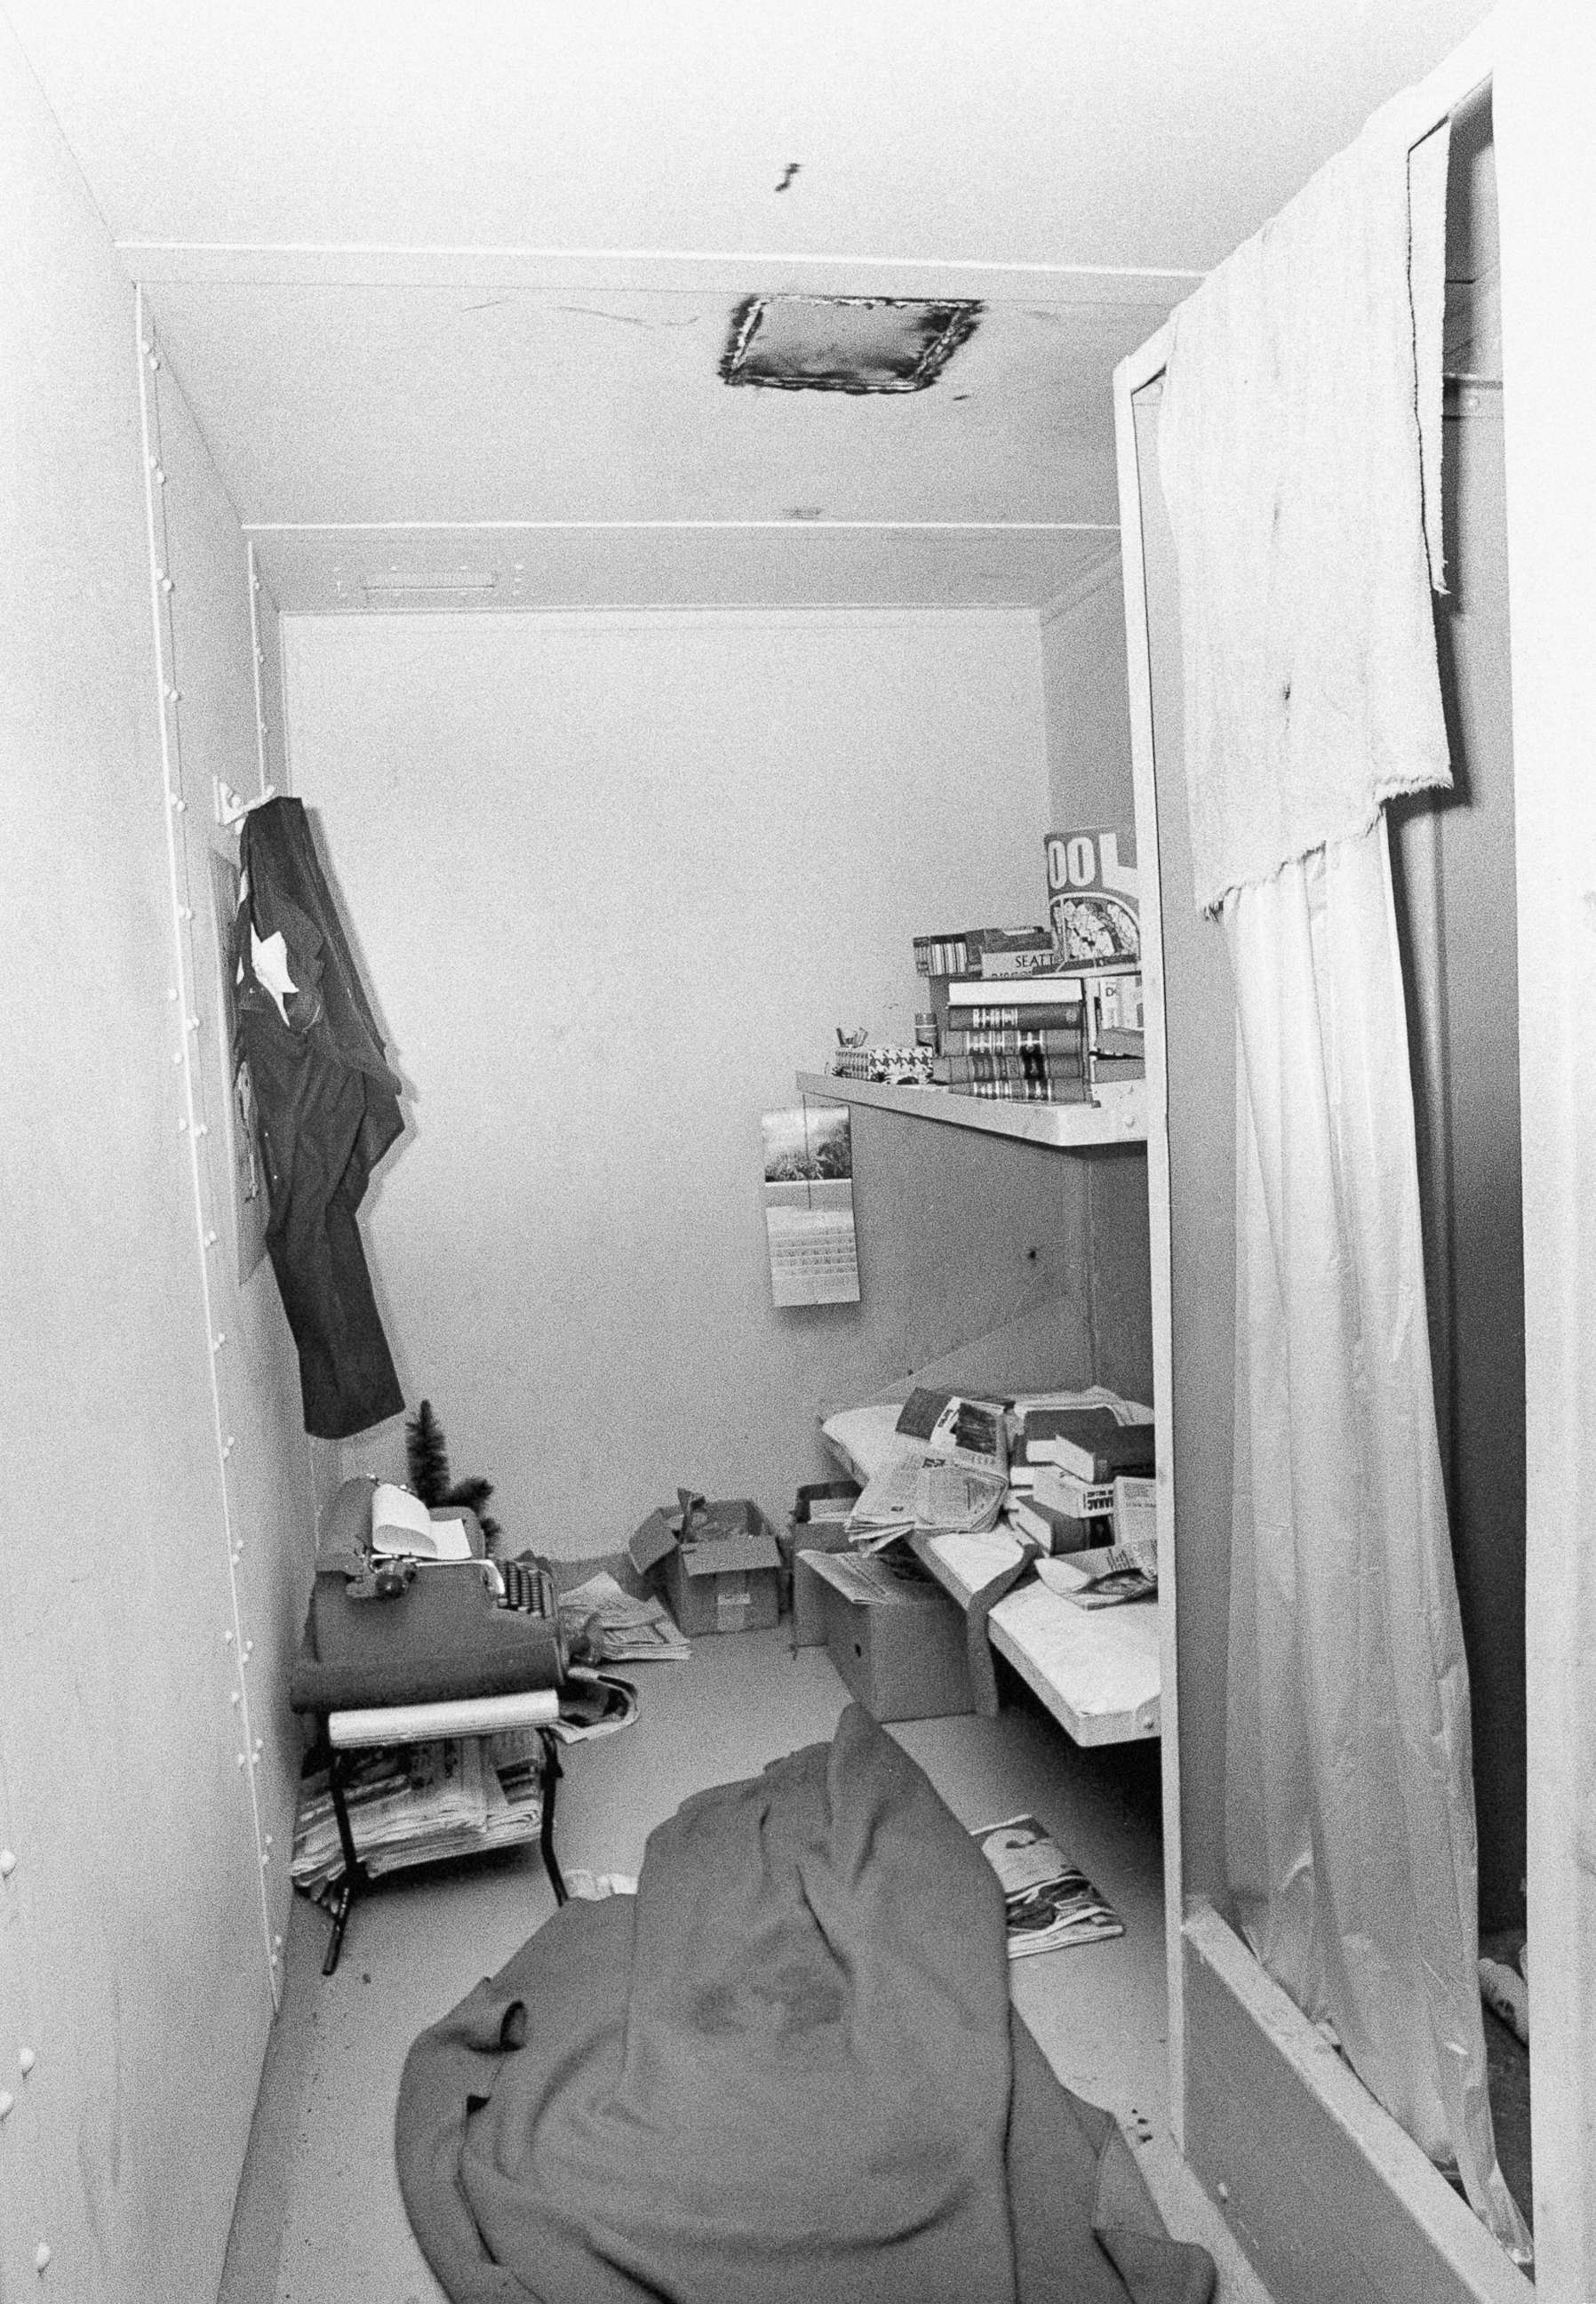 PHOTO: This 1977 file photo shows the jail cell from which serial killer Ted Bundy escaped on Dec. 30, 1977, in Glenwood Springs, Colo.